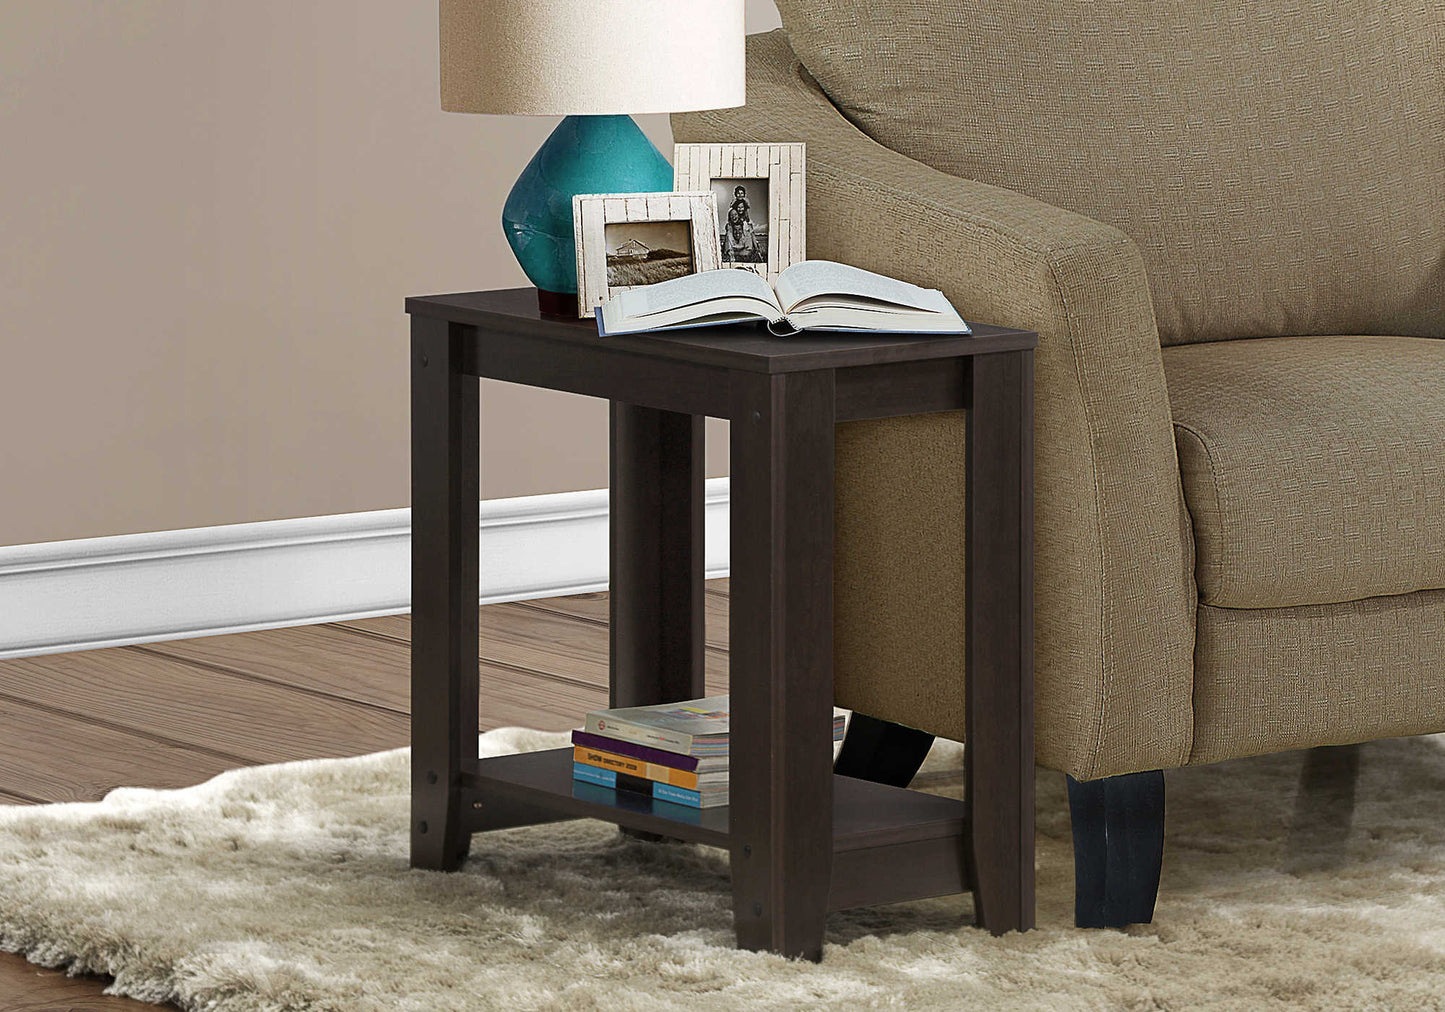 23.75 L / 22 H Transitional Rubberwood Laminate Bedroom End Table